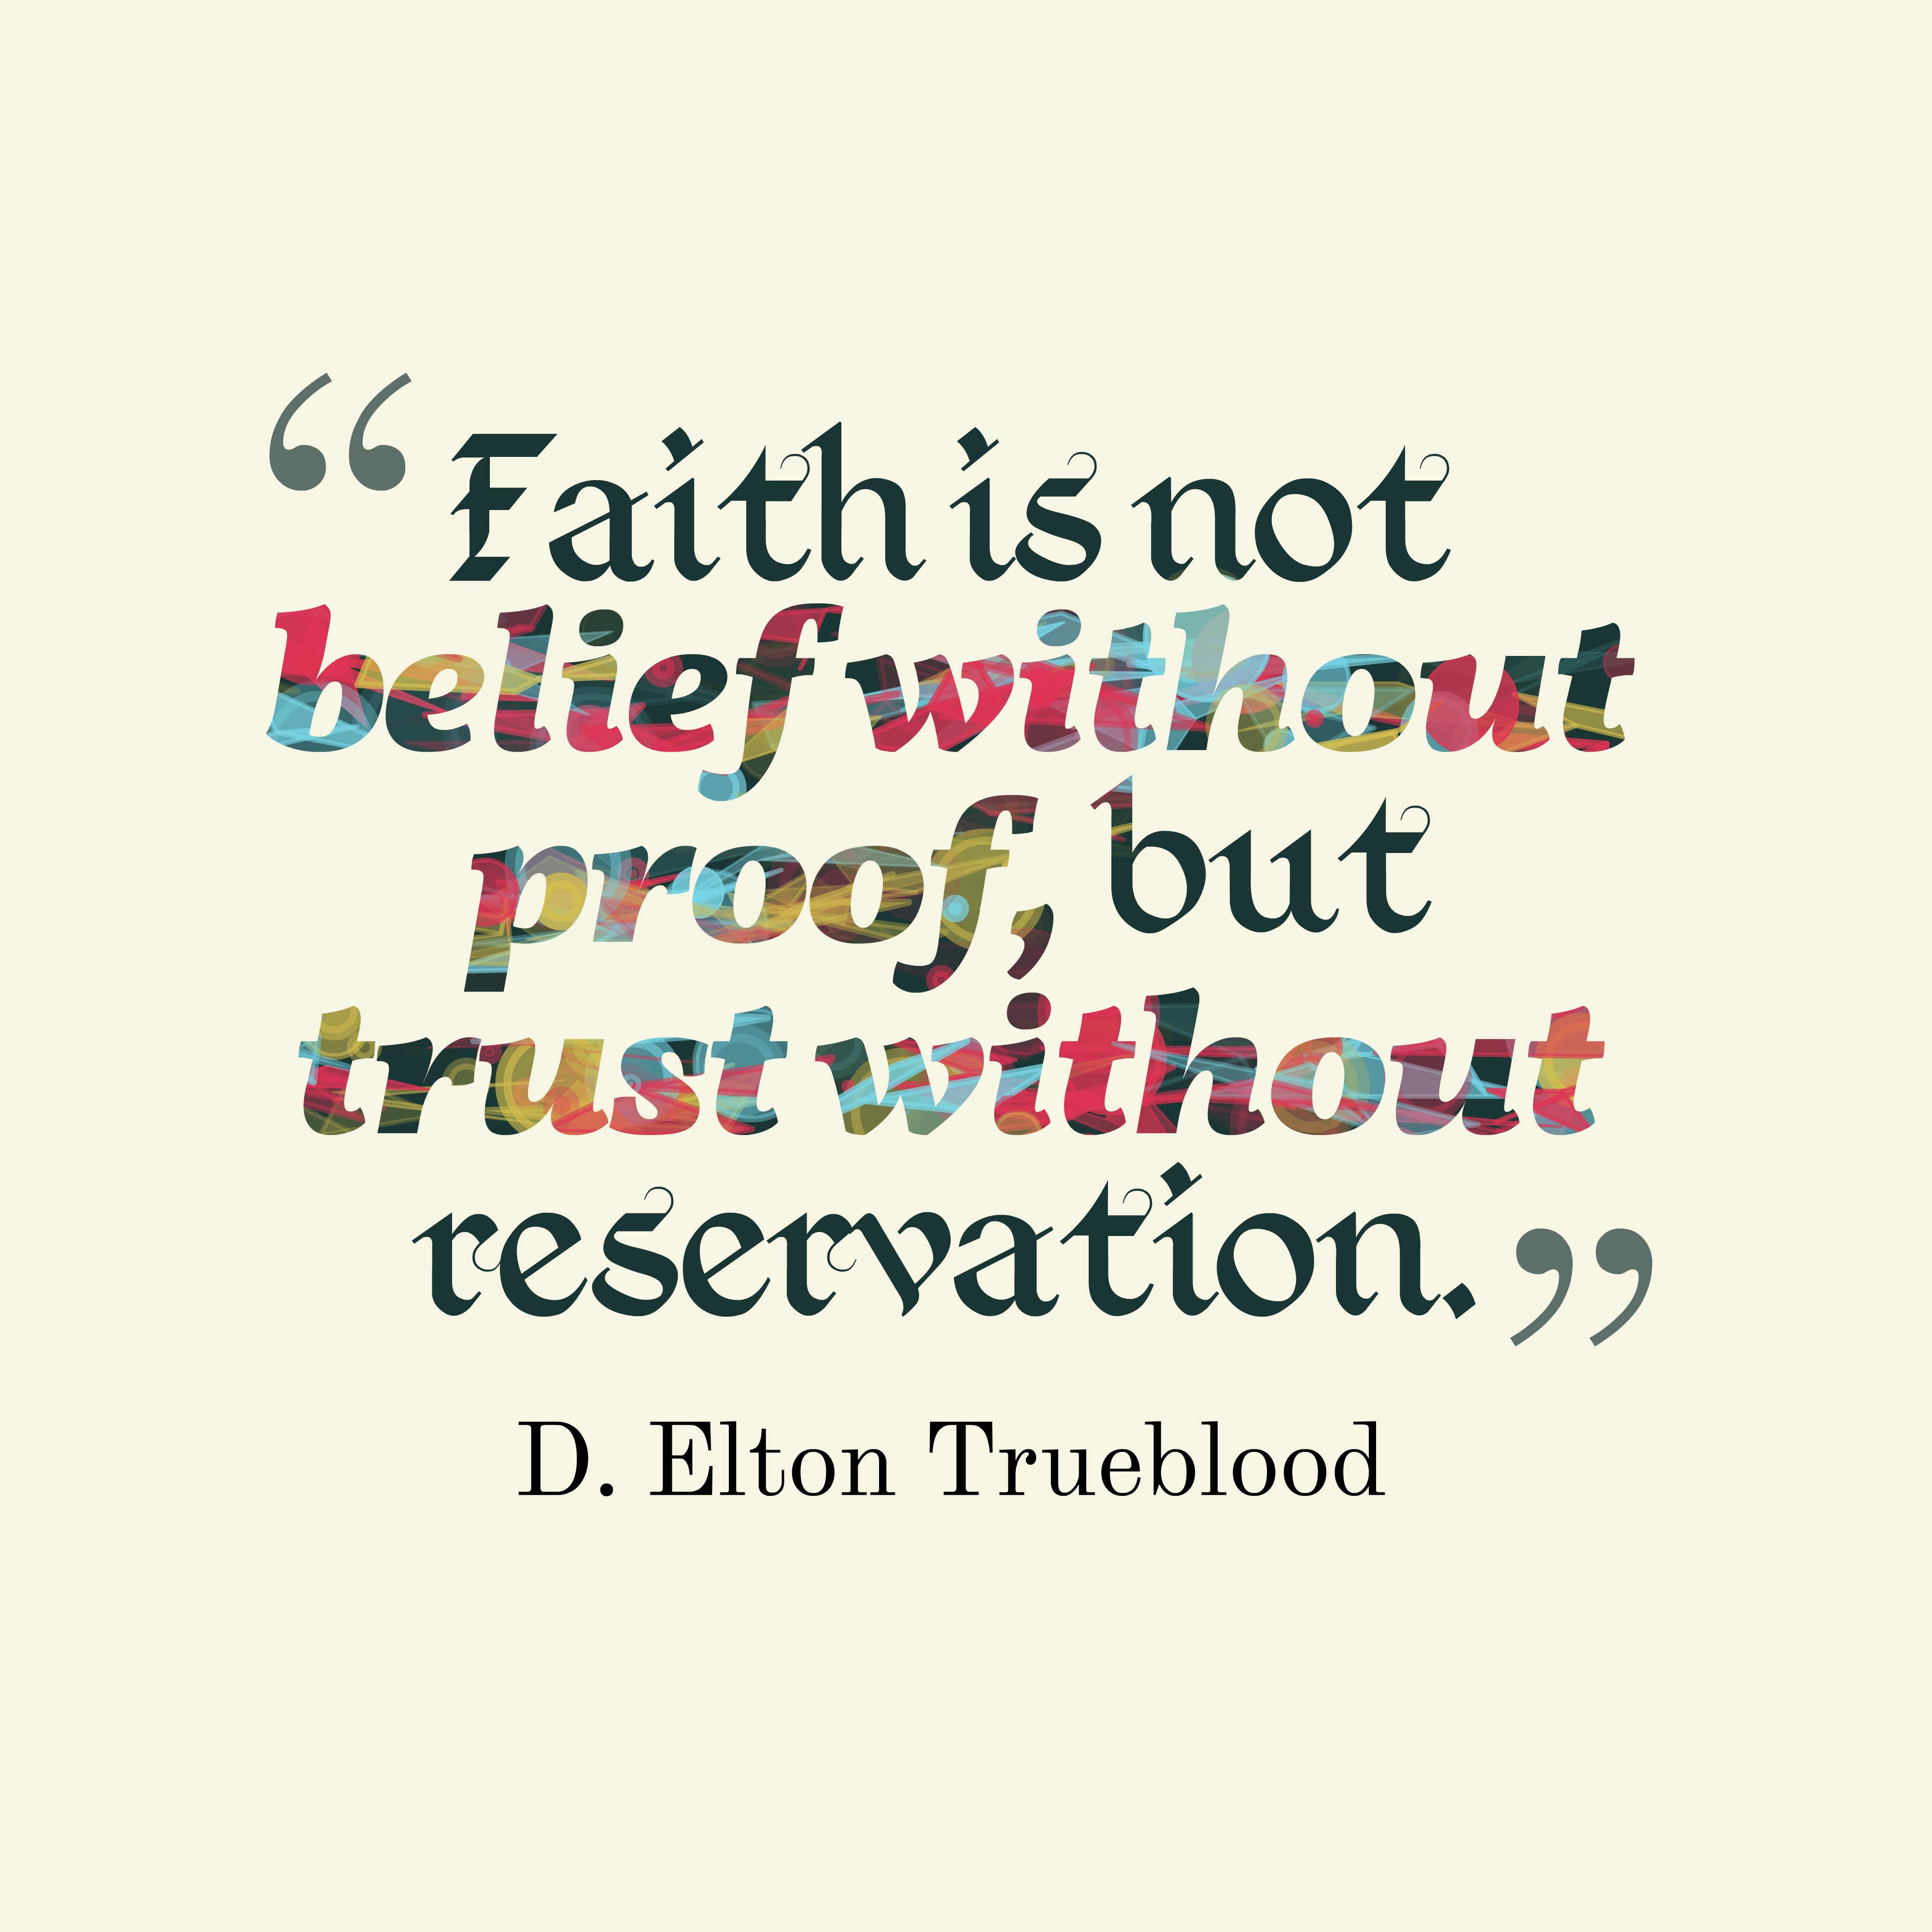 aith is not belief without proof, but trust without reservation.